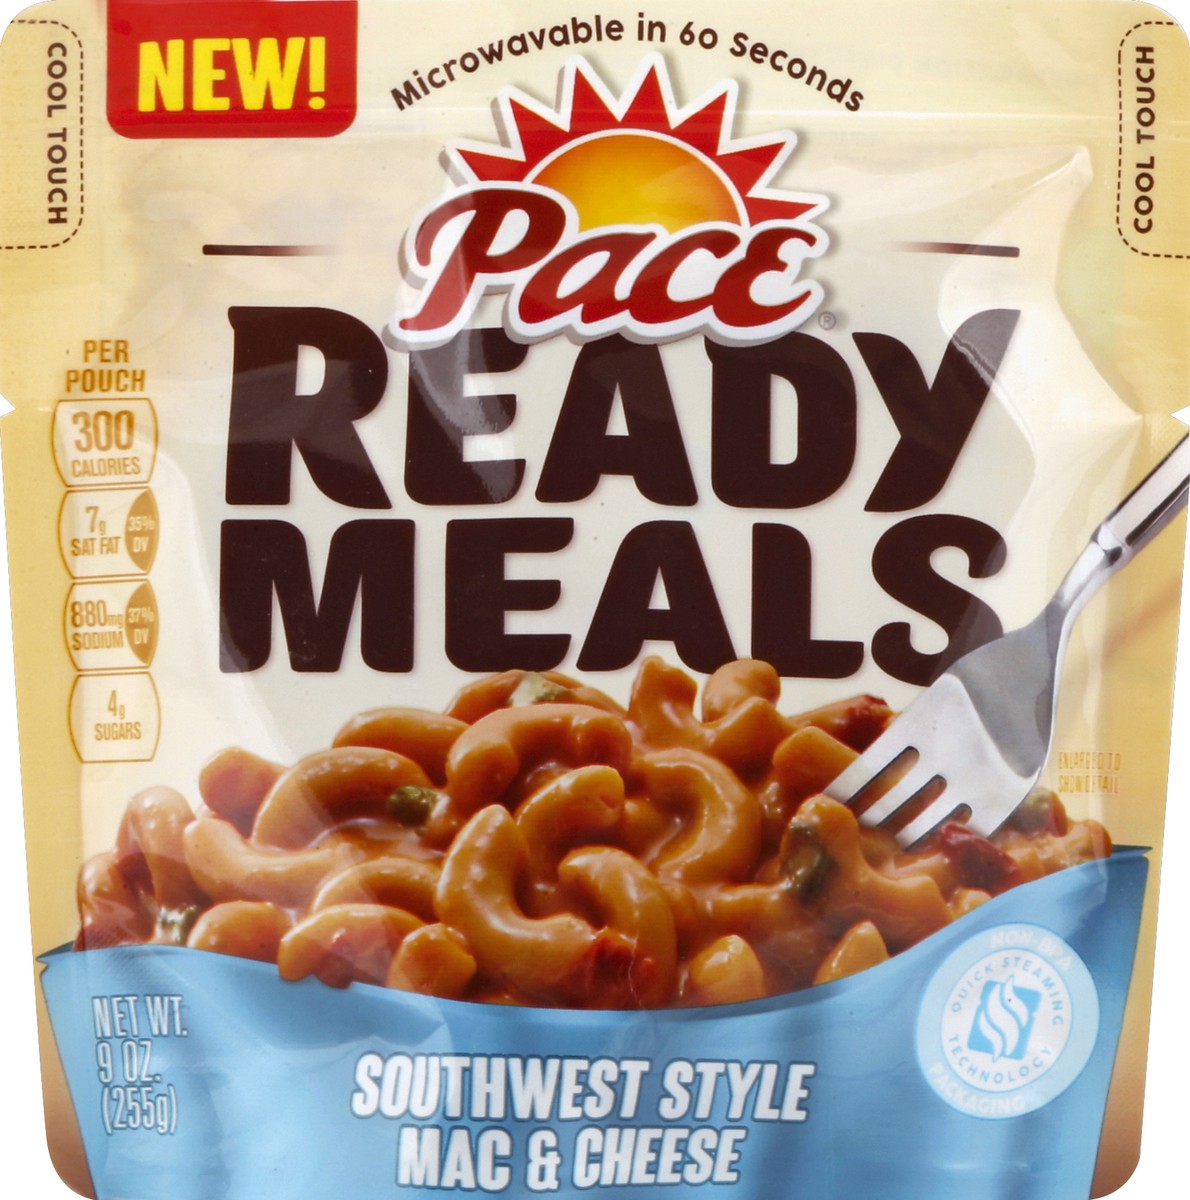 slide 2 of 2, Pace Ready Meals Southwest Style Mac & Cheese, 9 oz